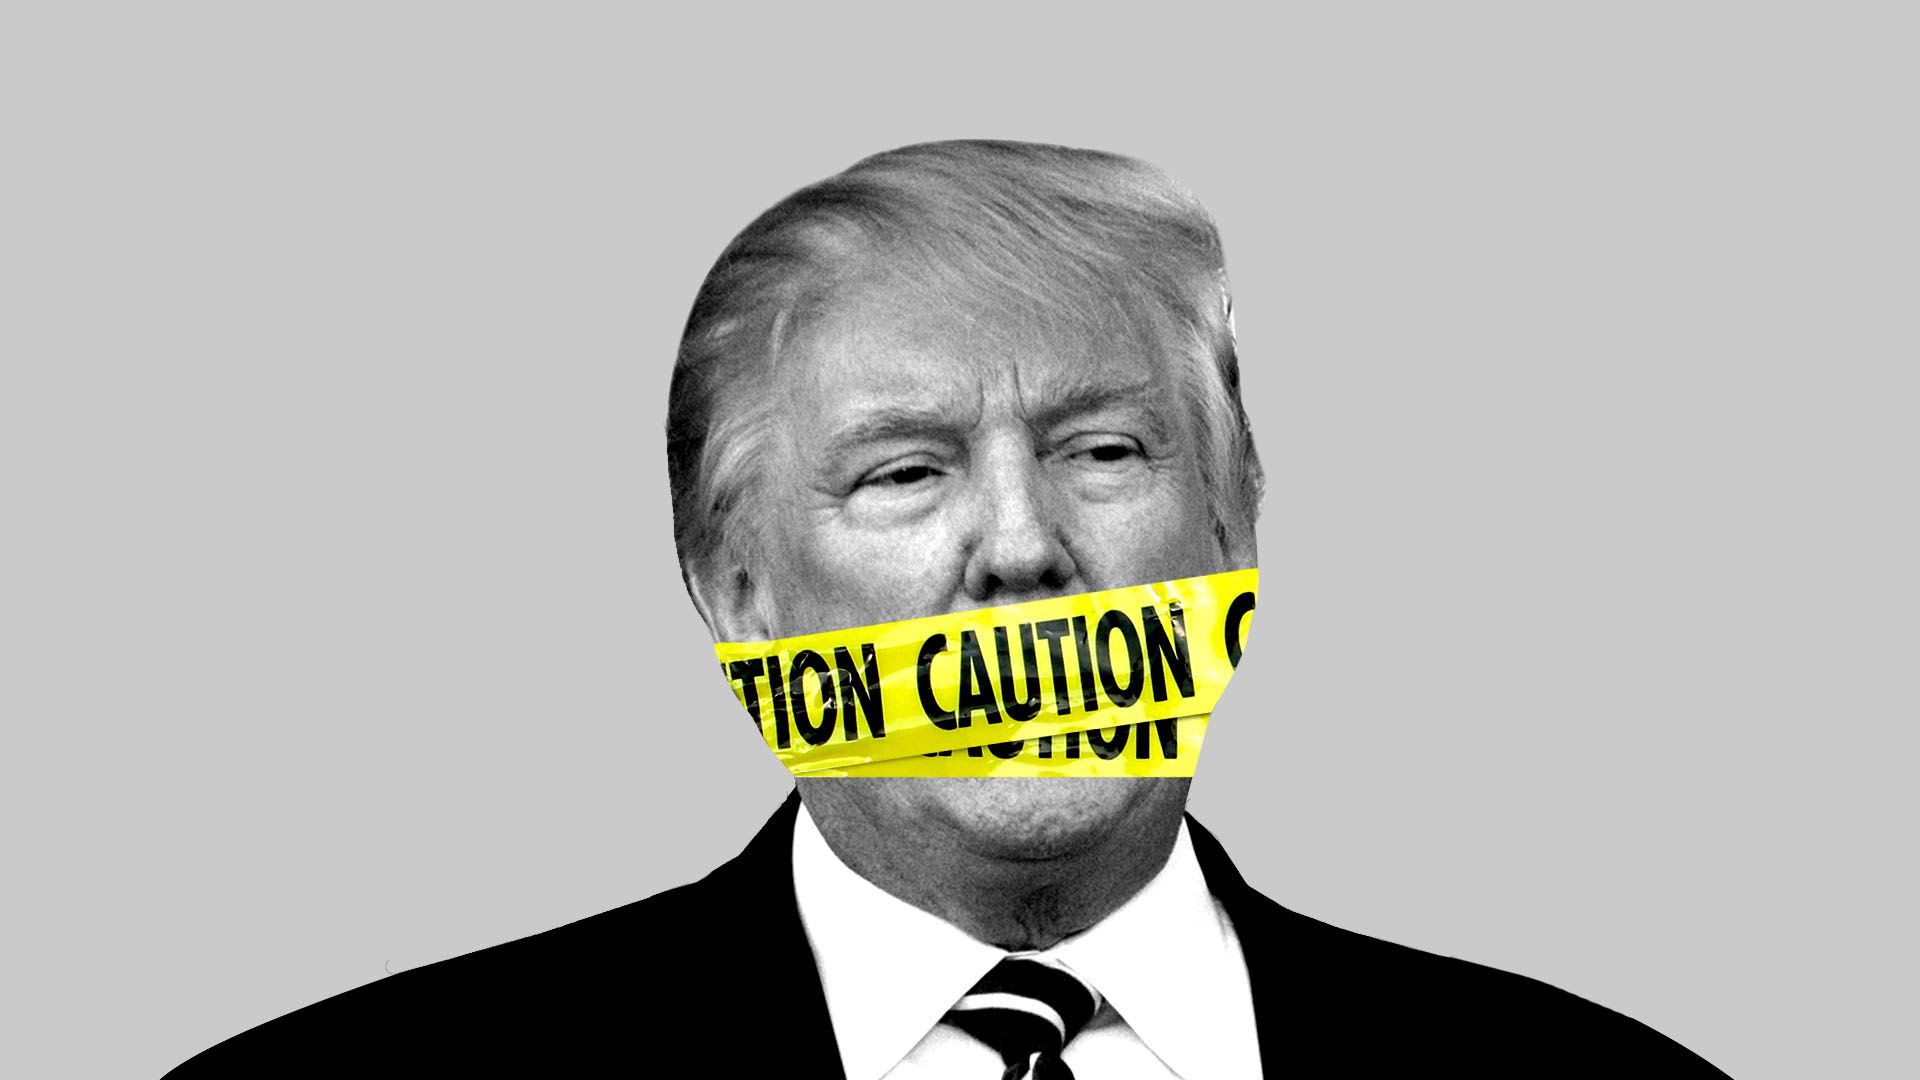 Trump mouth police yellow caution tape Blank Meme Template